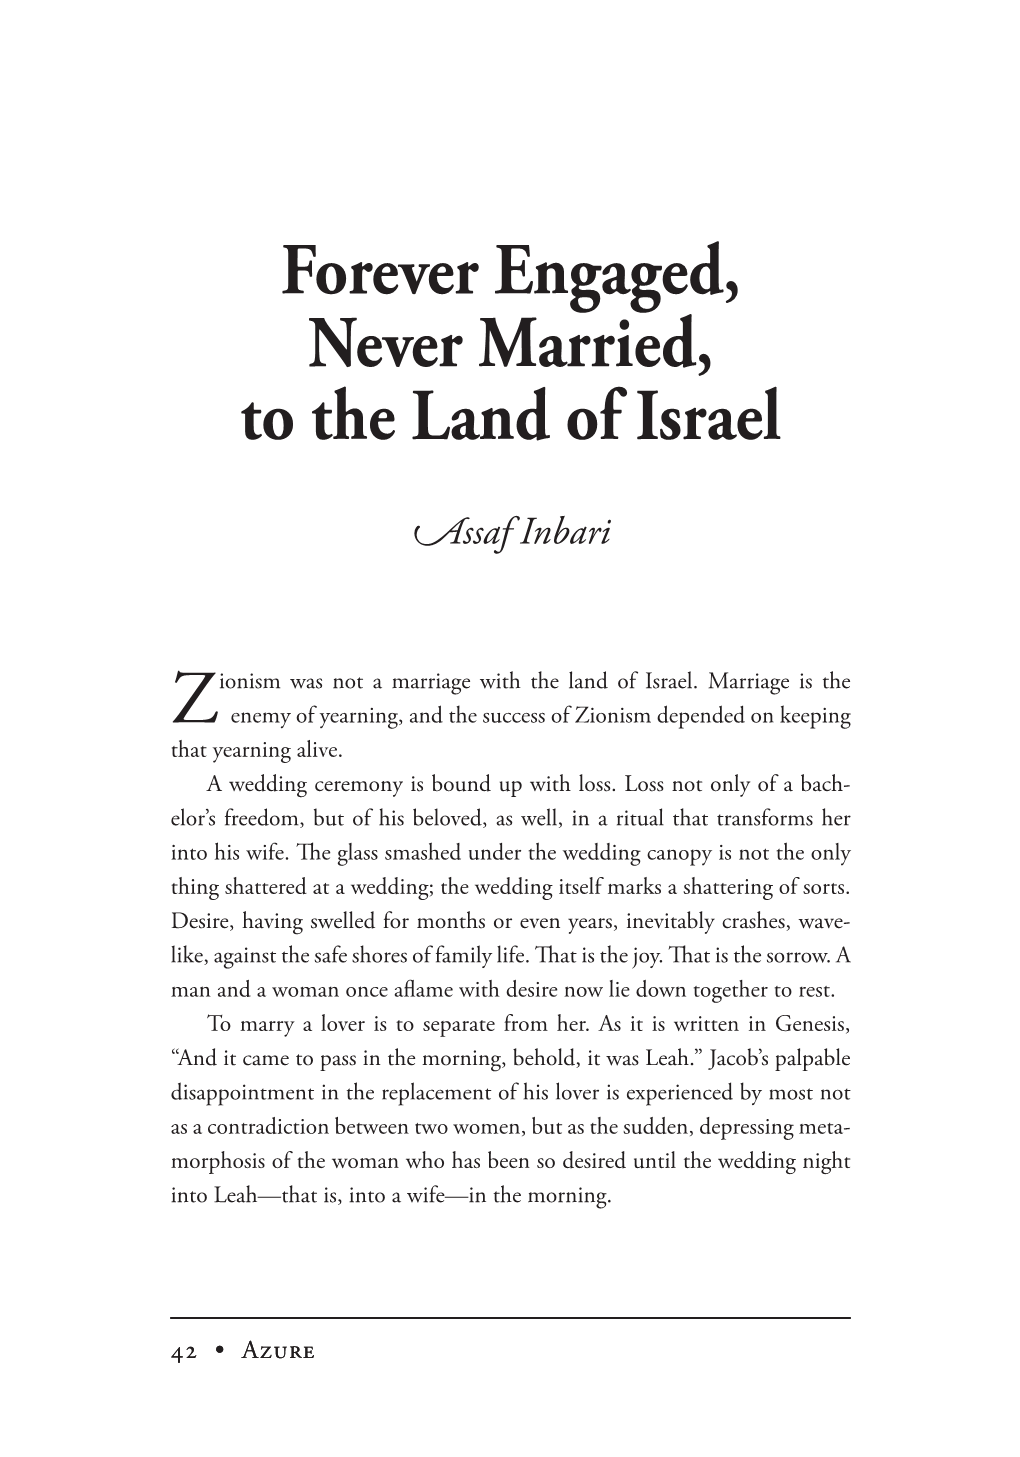 Forever Engaged, Never Married, to the Land of Israel